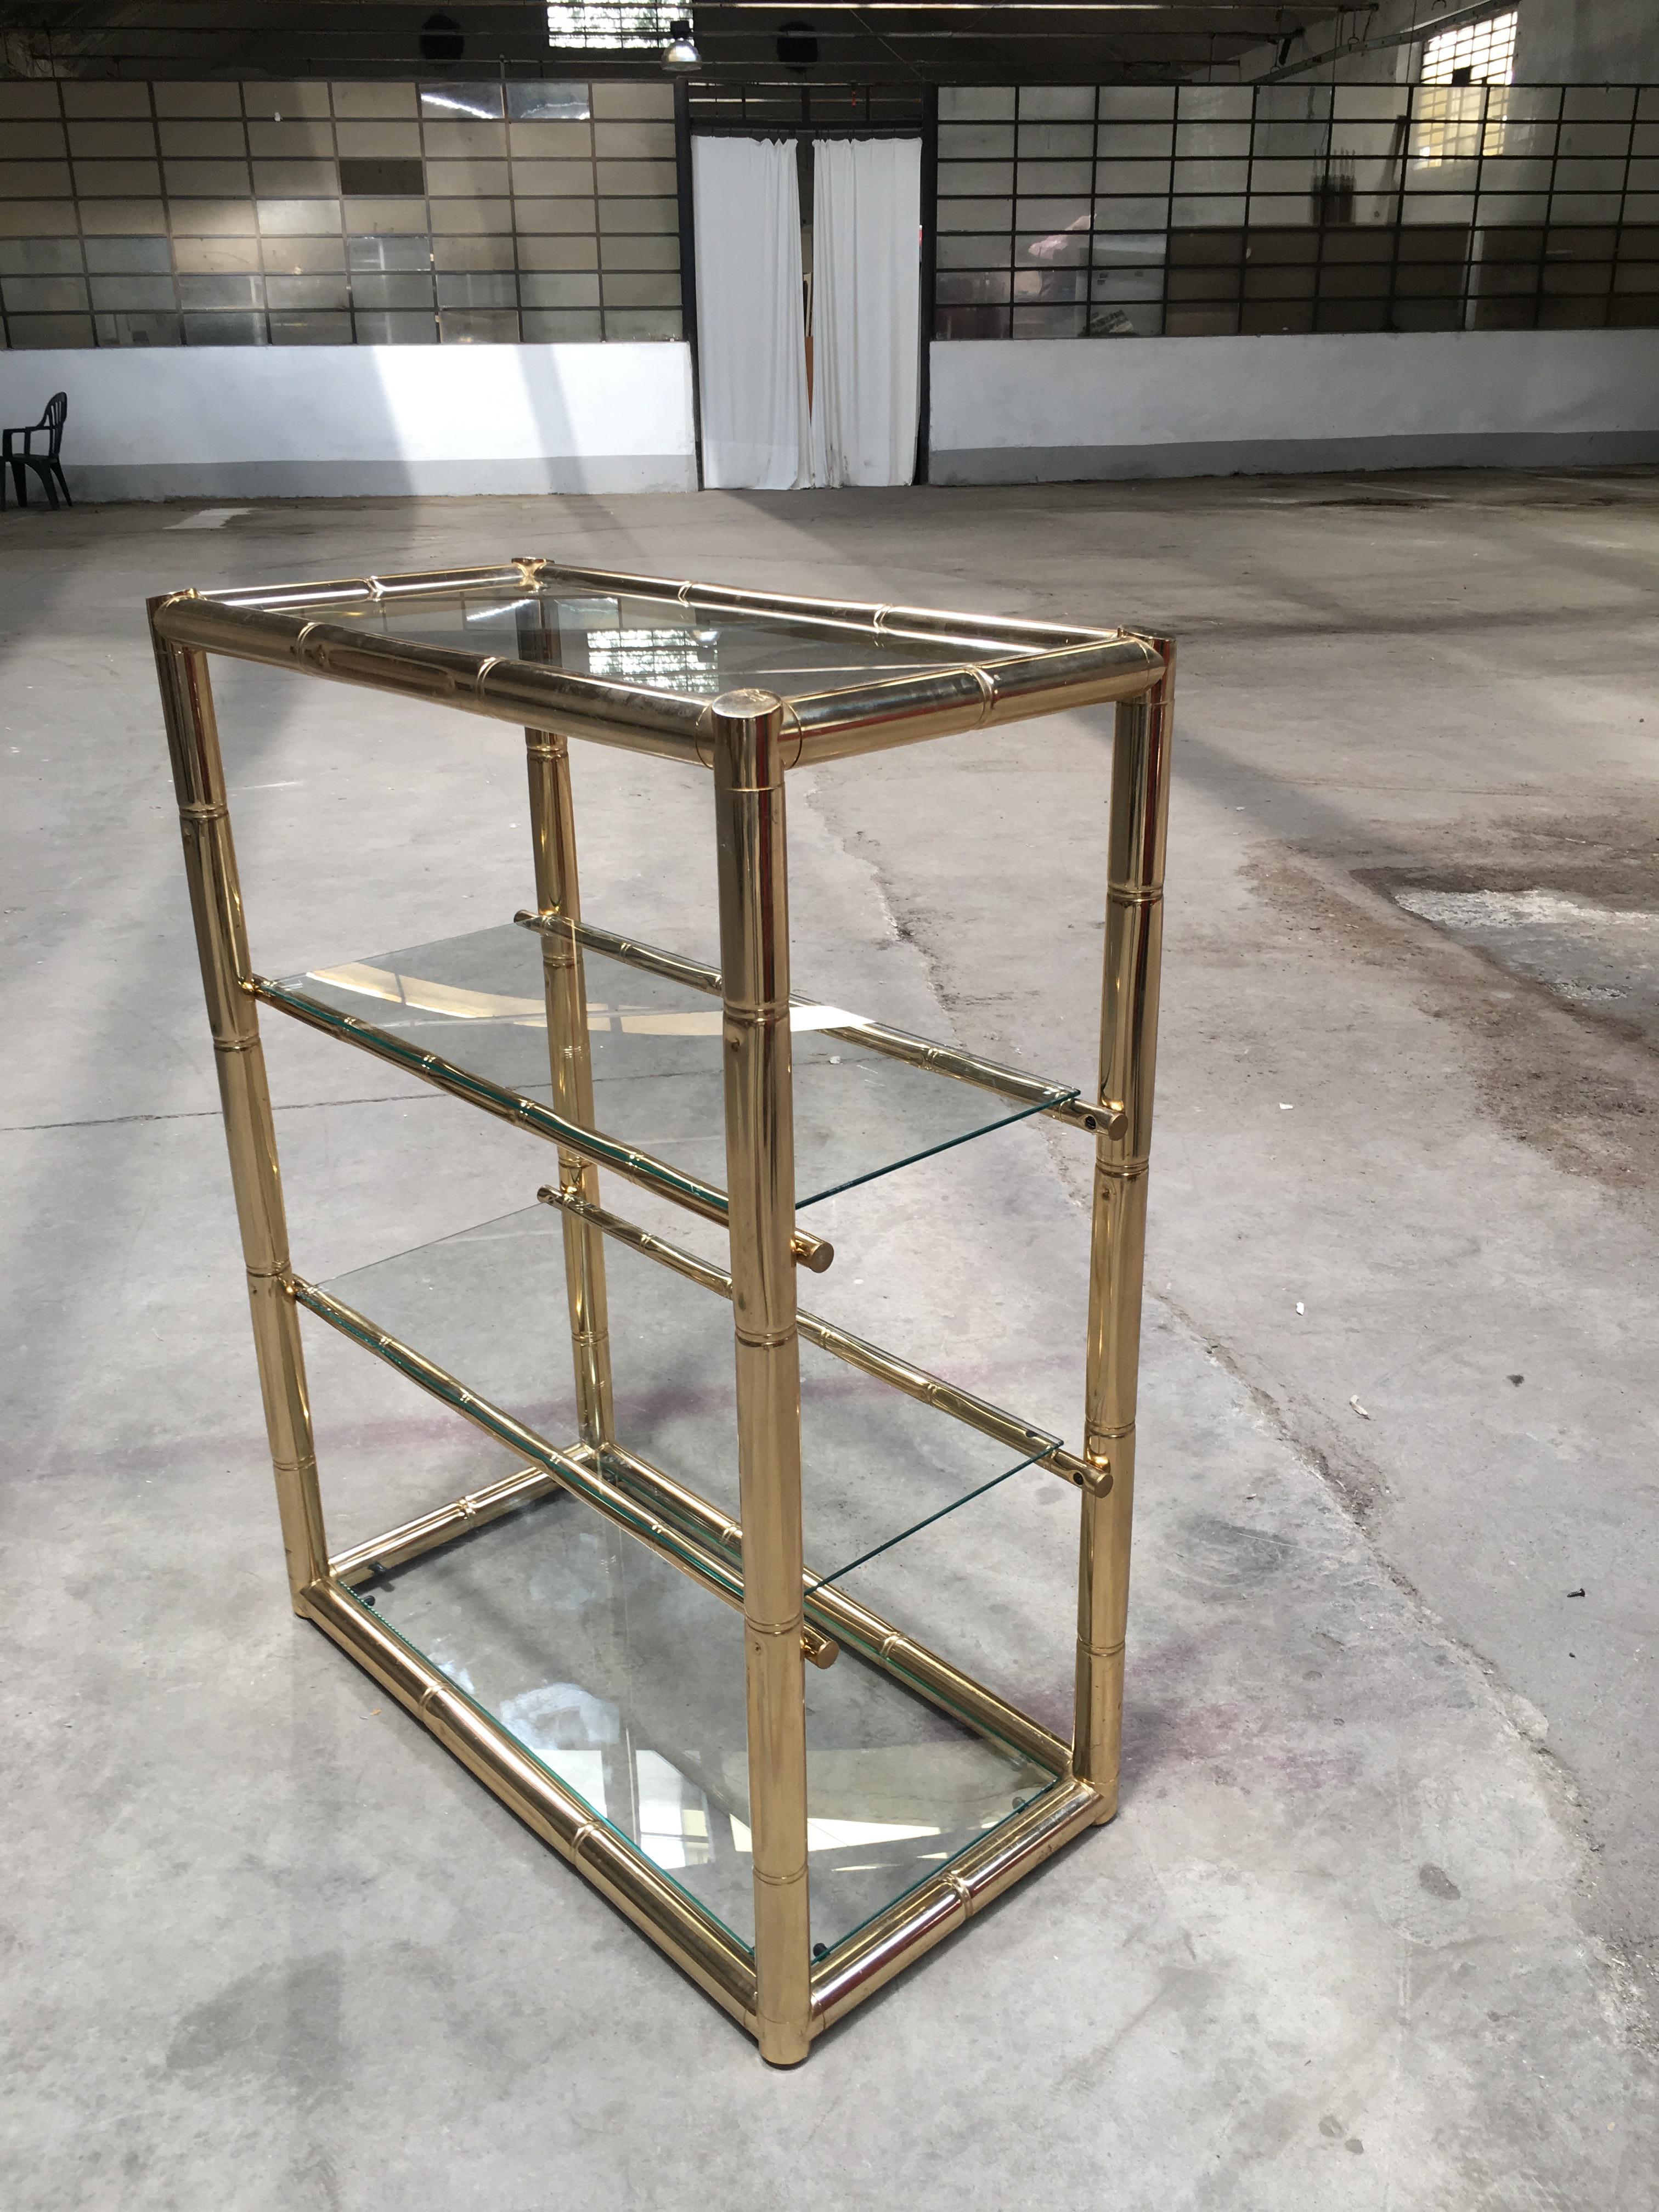 Mid-Century Modern four-tier Italian faux bamboo gilt metal and glass etagere from 1970s
This etagere could matches with a console table, a mirror, a freestanding rack as shown in the pictures.
Prices on demand.